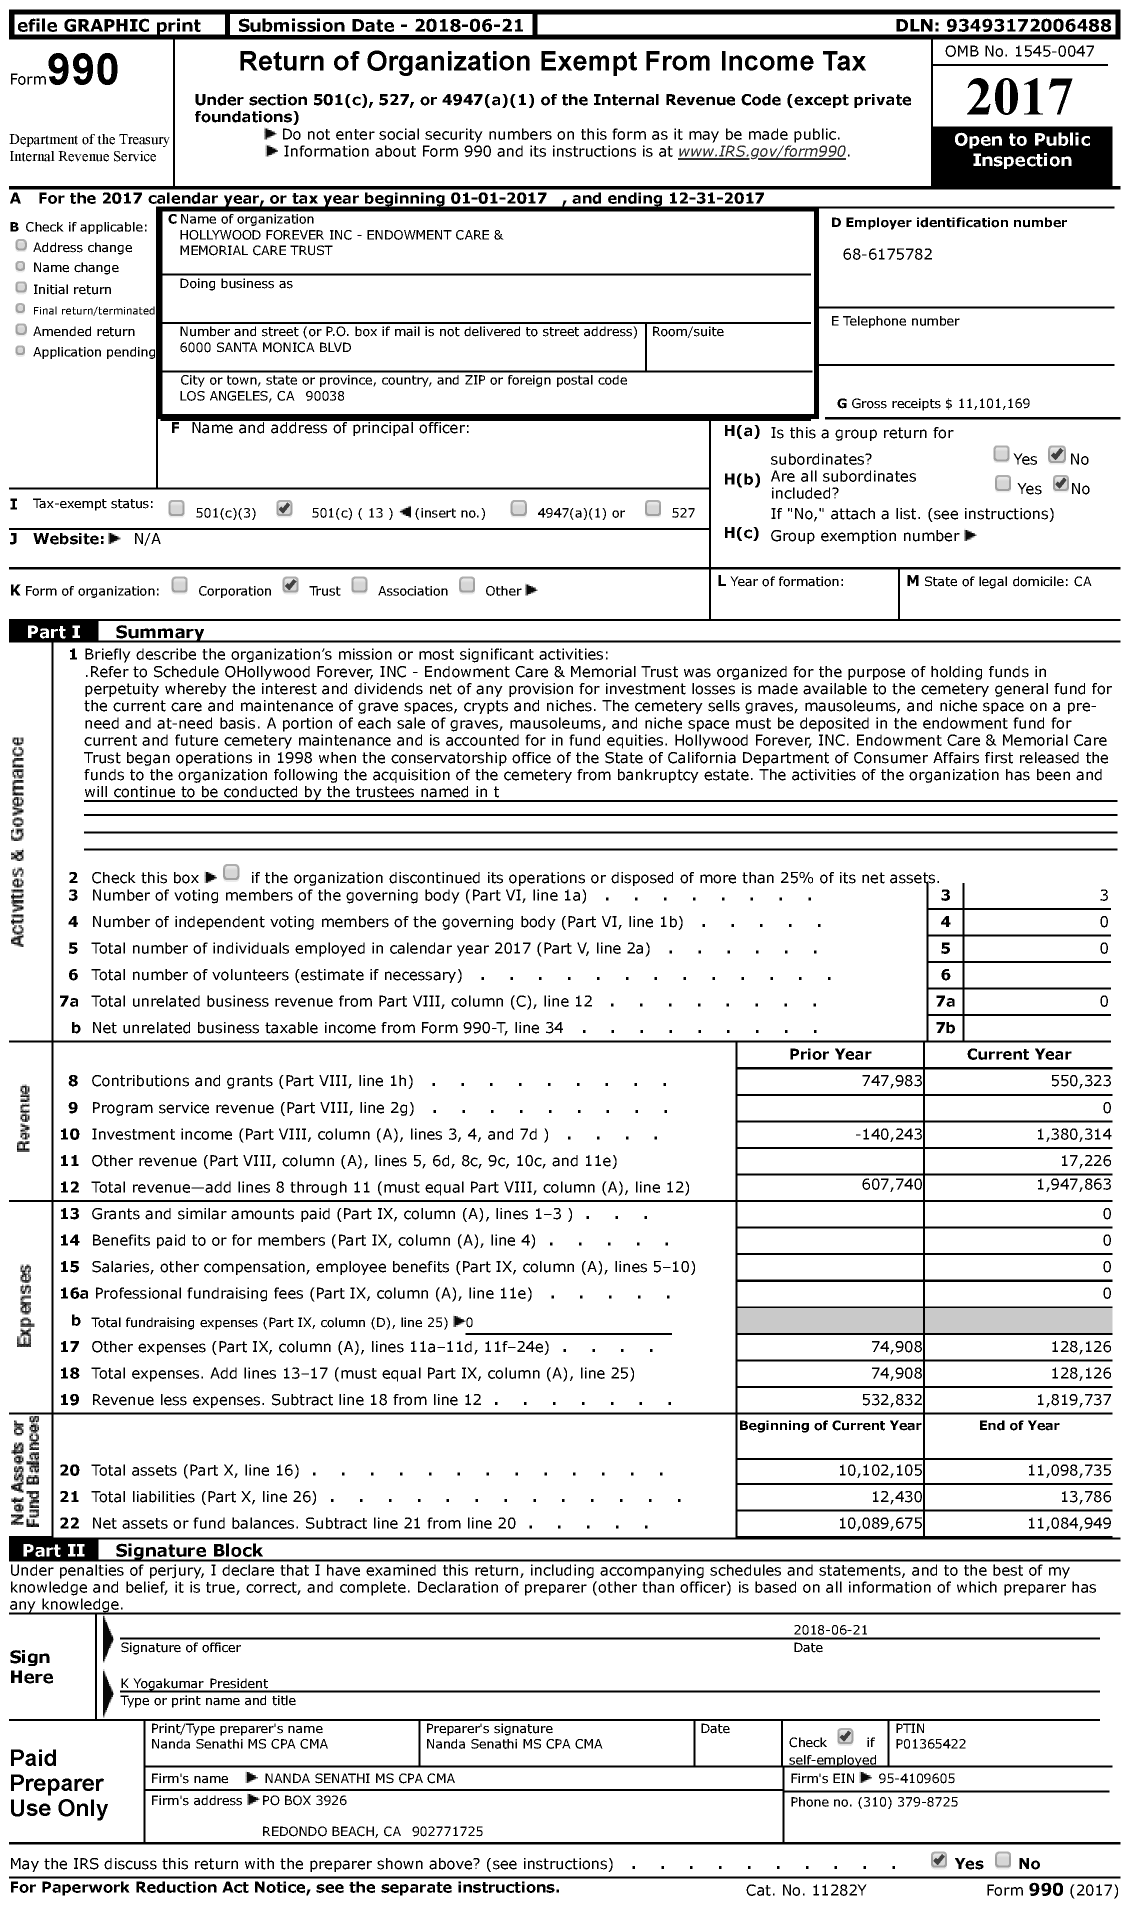 Image of first page of 2017 Form 990 for Hollywood Forever - Endowment Care and Memorial Care Trust